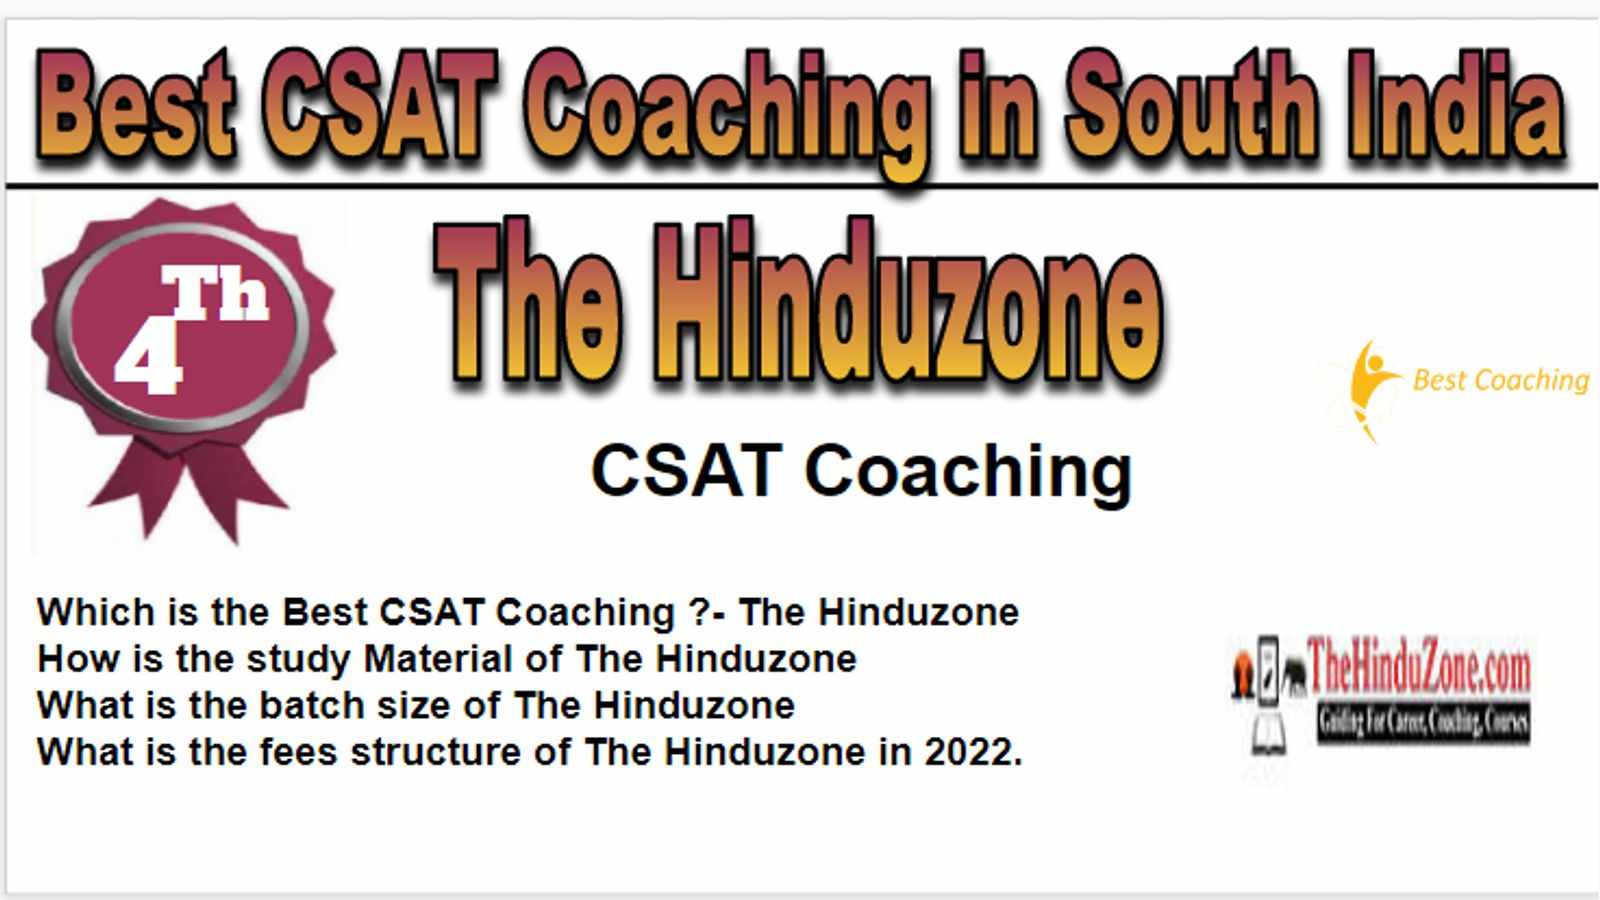 Rank 4 Best CSAT Coaching in South India